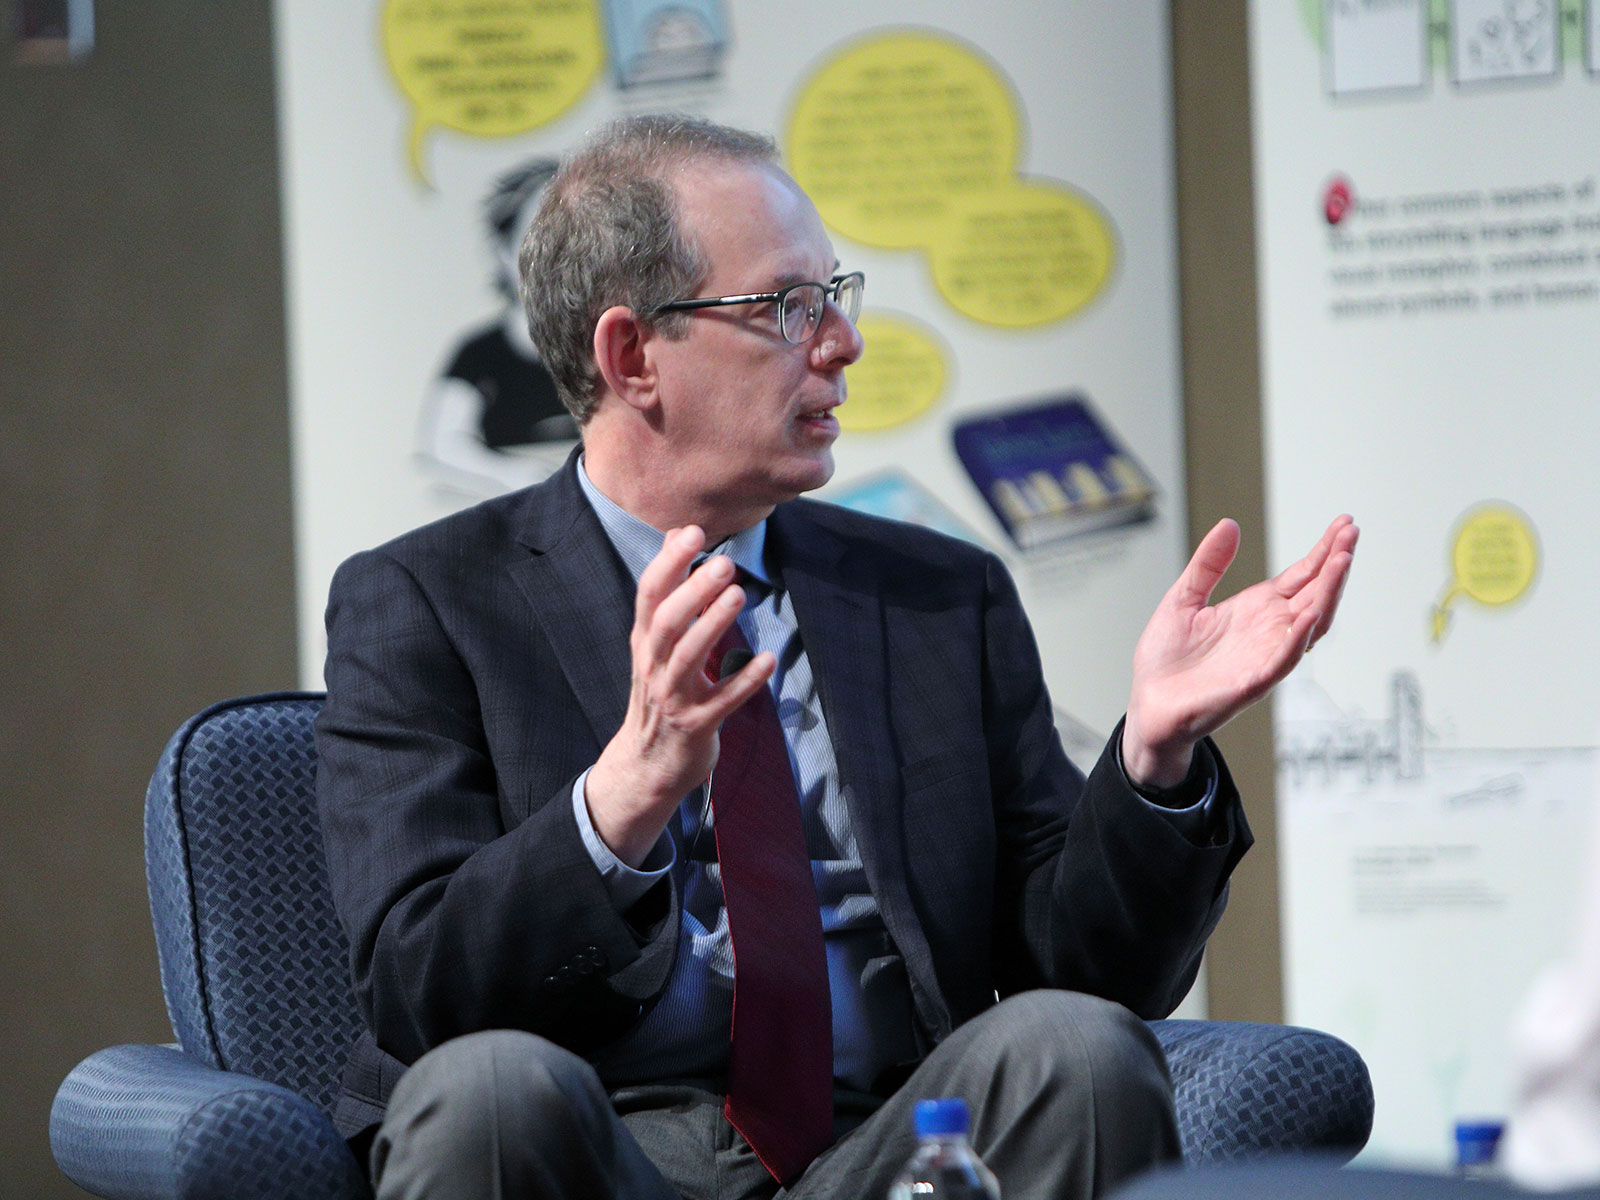 Dr. Michael Green recently discussed how reading and creating comics helps students with practical doctoring skills during a panel discussion at the National Institutes of Health. Green is pictured seated, gesturing with his hands and looking to the right. Large posters are visible behind him.